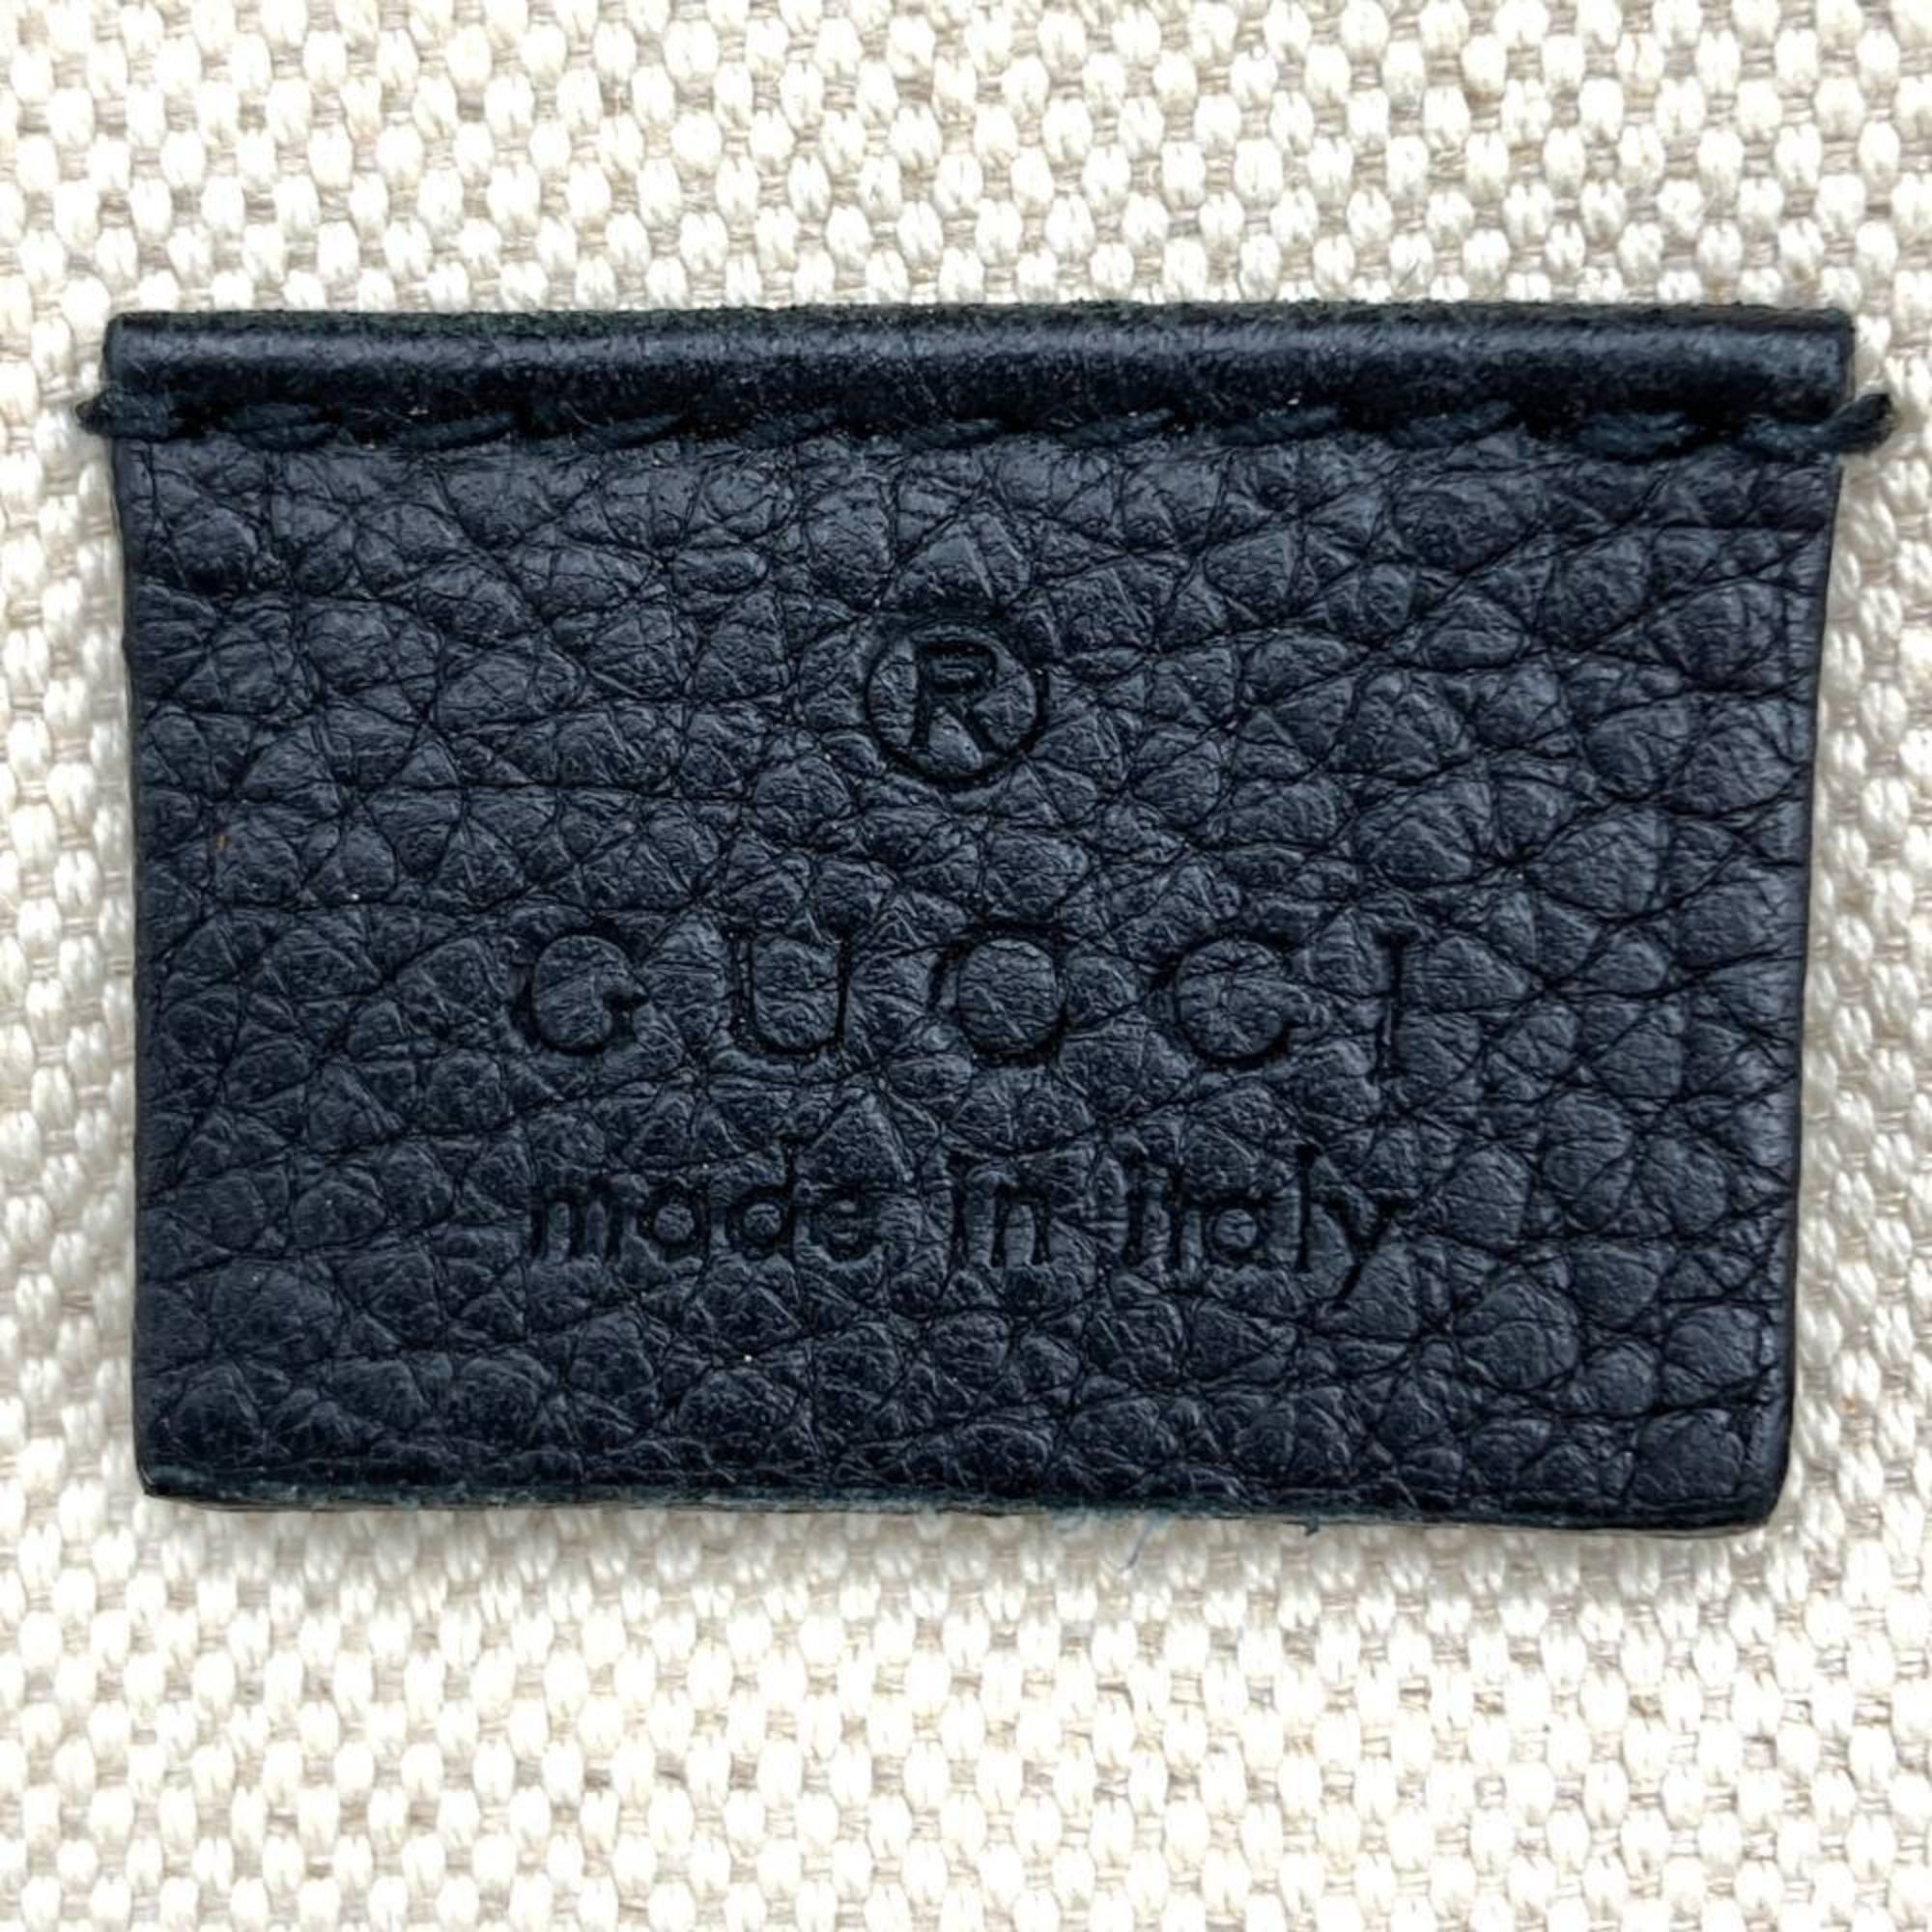 Gucci Waist Bag Body Pouch Sherry Line Black Leather Women's 527792 GUCCI